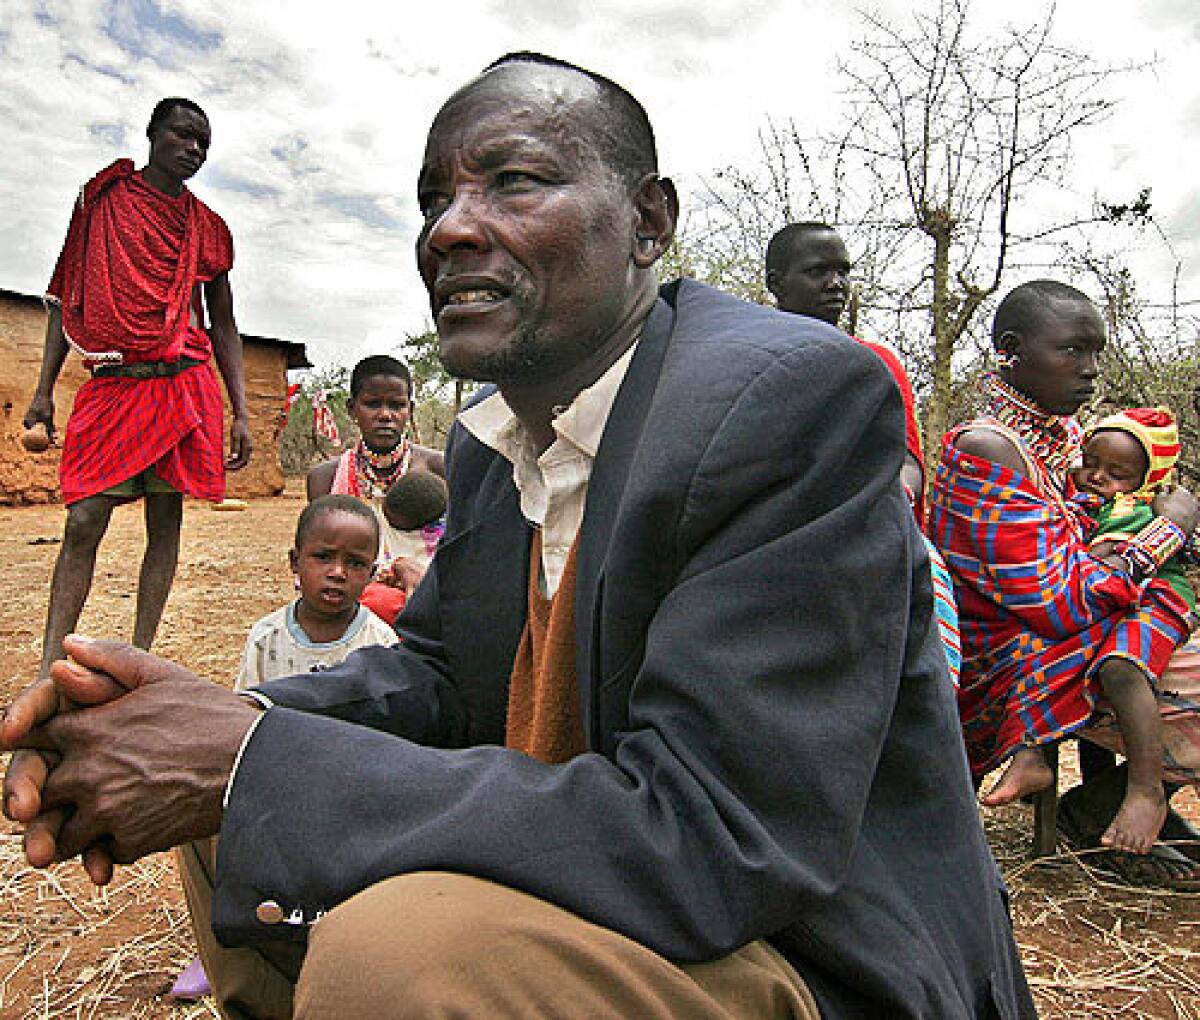 Soitanae Ole Kyoiogo, 47, a Masai herdsman, lives with his family outside of his home near Kajiado, Kenya. Drought in East Africa has decimated the cattle population, the sole livelihood of many Masai people. Some fathers have resorted to marrying off their daughters as young as nine to receive a dowry including livestook to help replenish their stocks. Two of Soitanae's daughters, aged 10 and 9, ran away to a local boarding school to escape marriage.